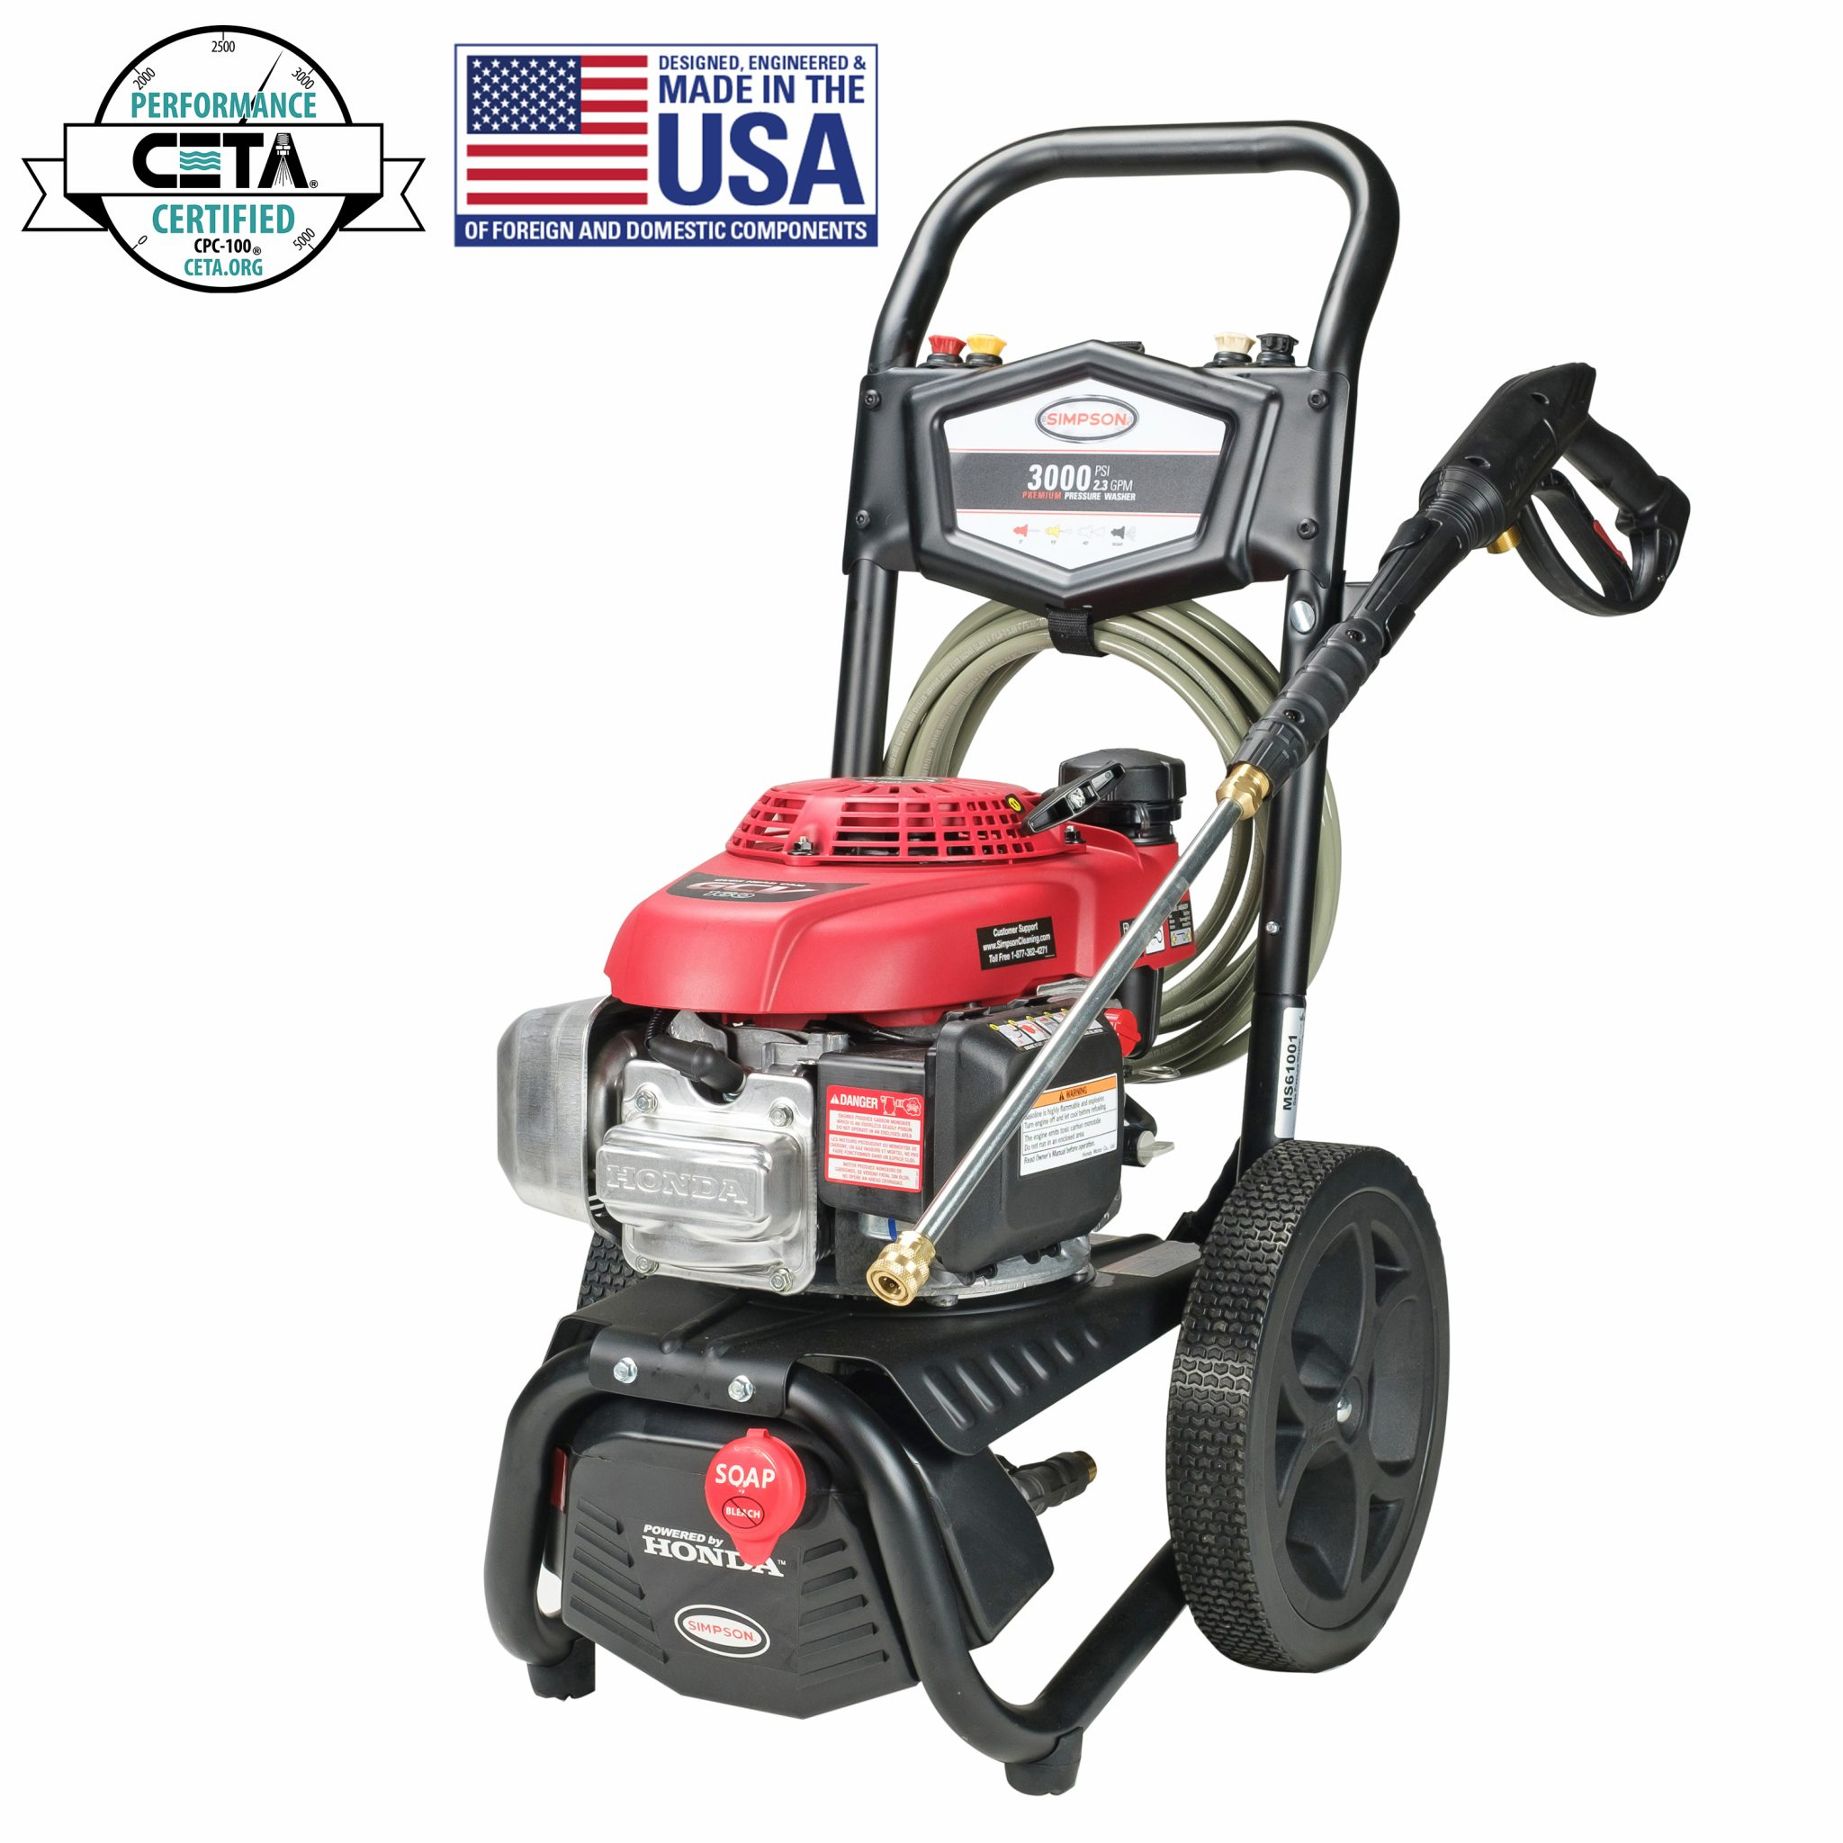 MS61001 POWER WASHER PARTS